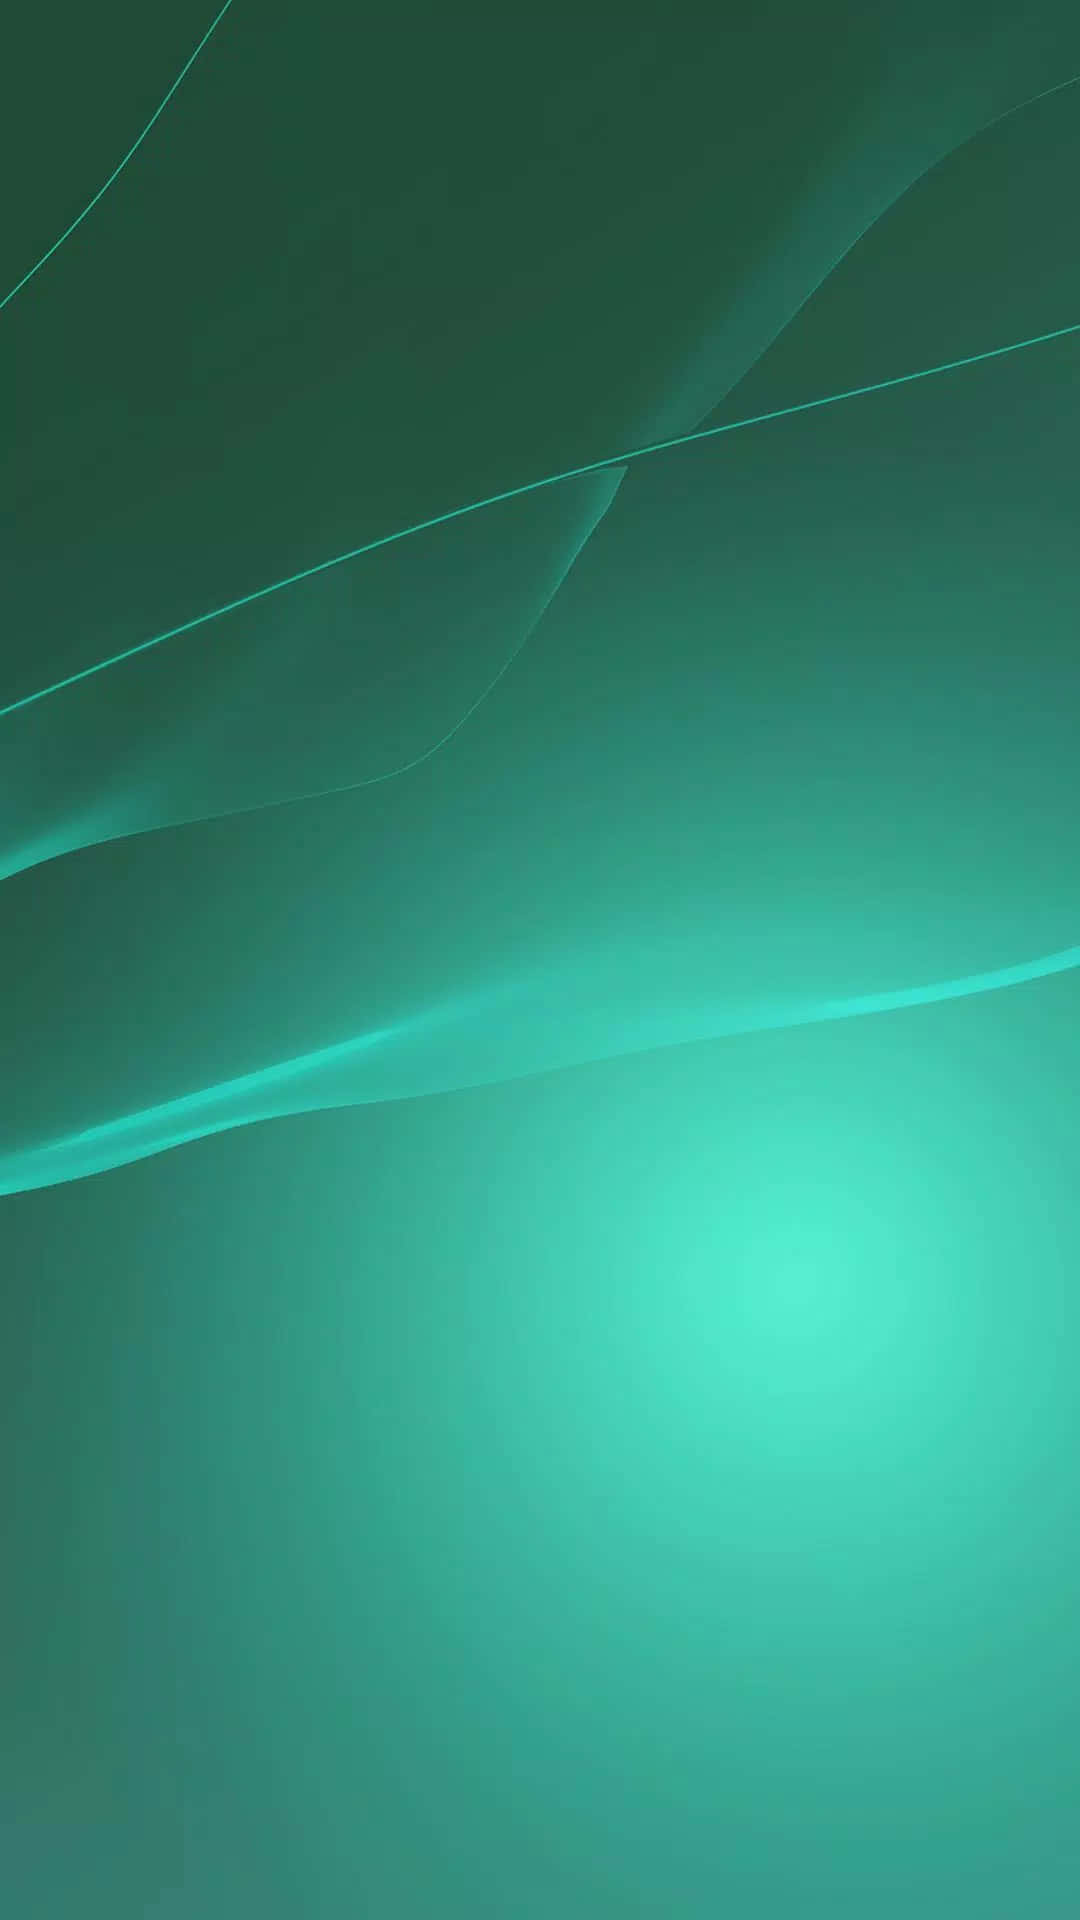 A Green Background With A Wave Pattern Wallpaper